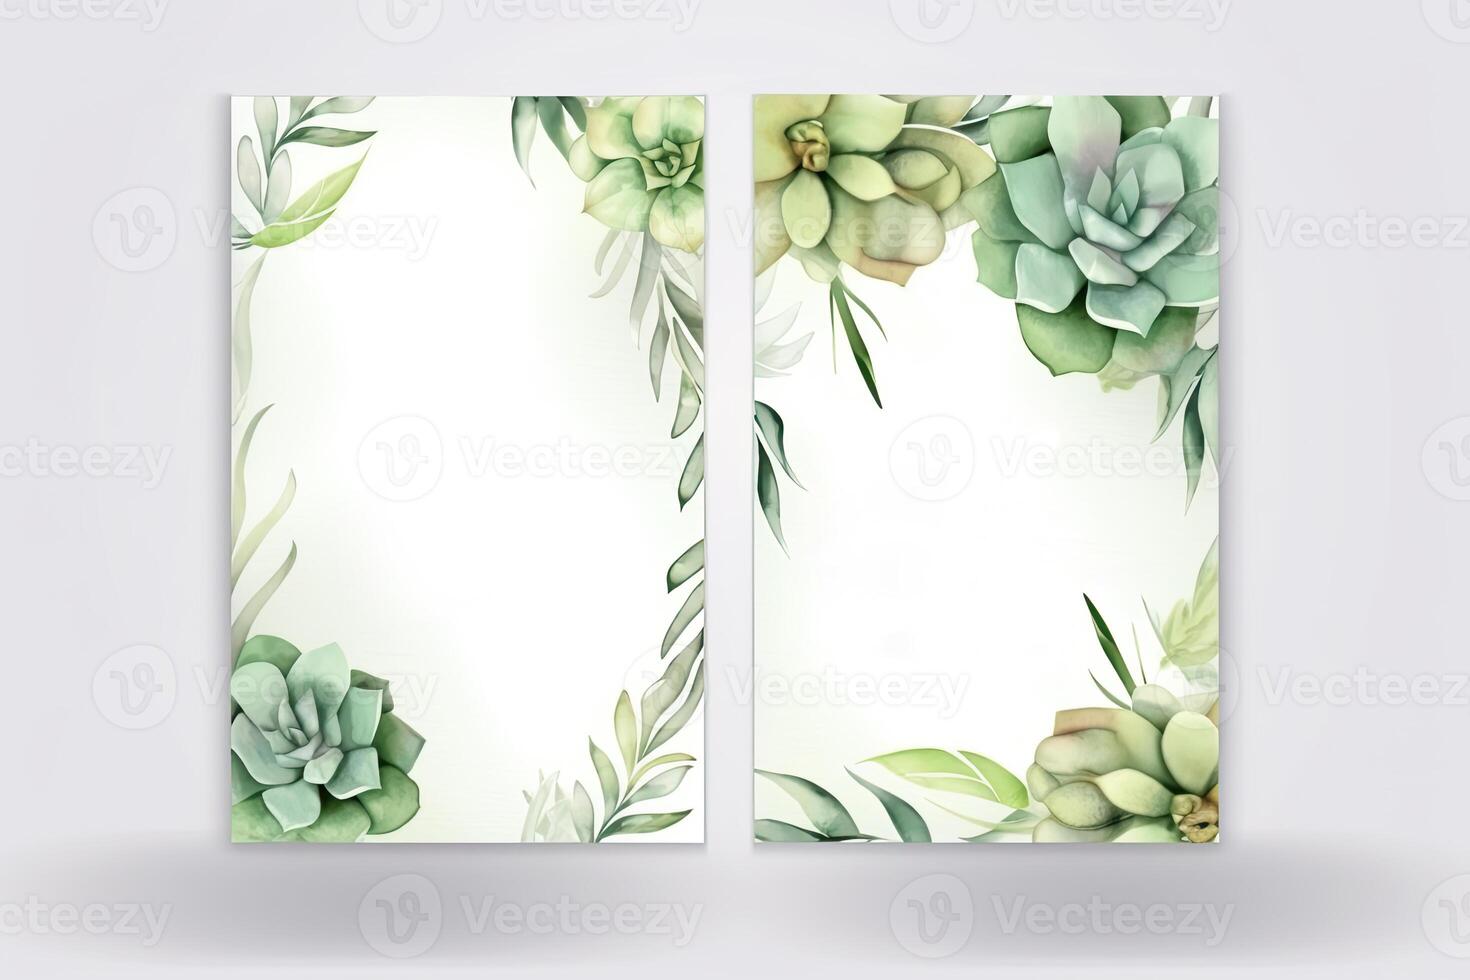 Watercolor Botanical Composition Vertical Background or Card Design with Succulent Flowers, Leaves. Illustration. photo